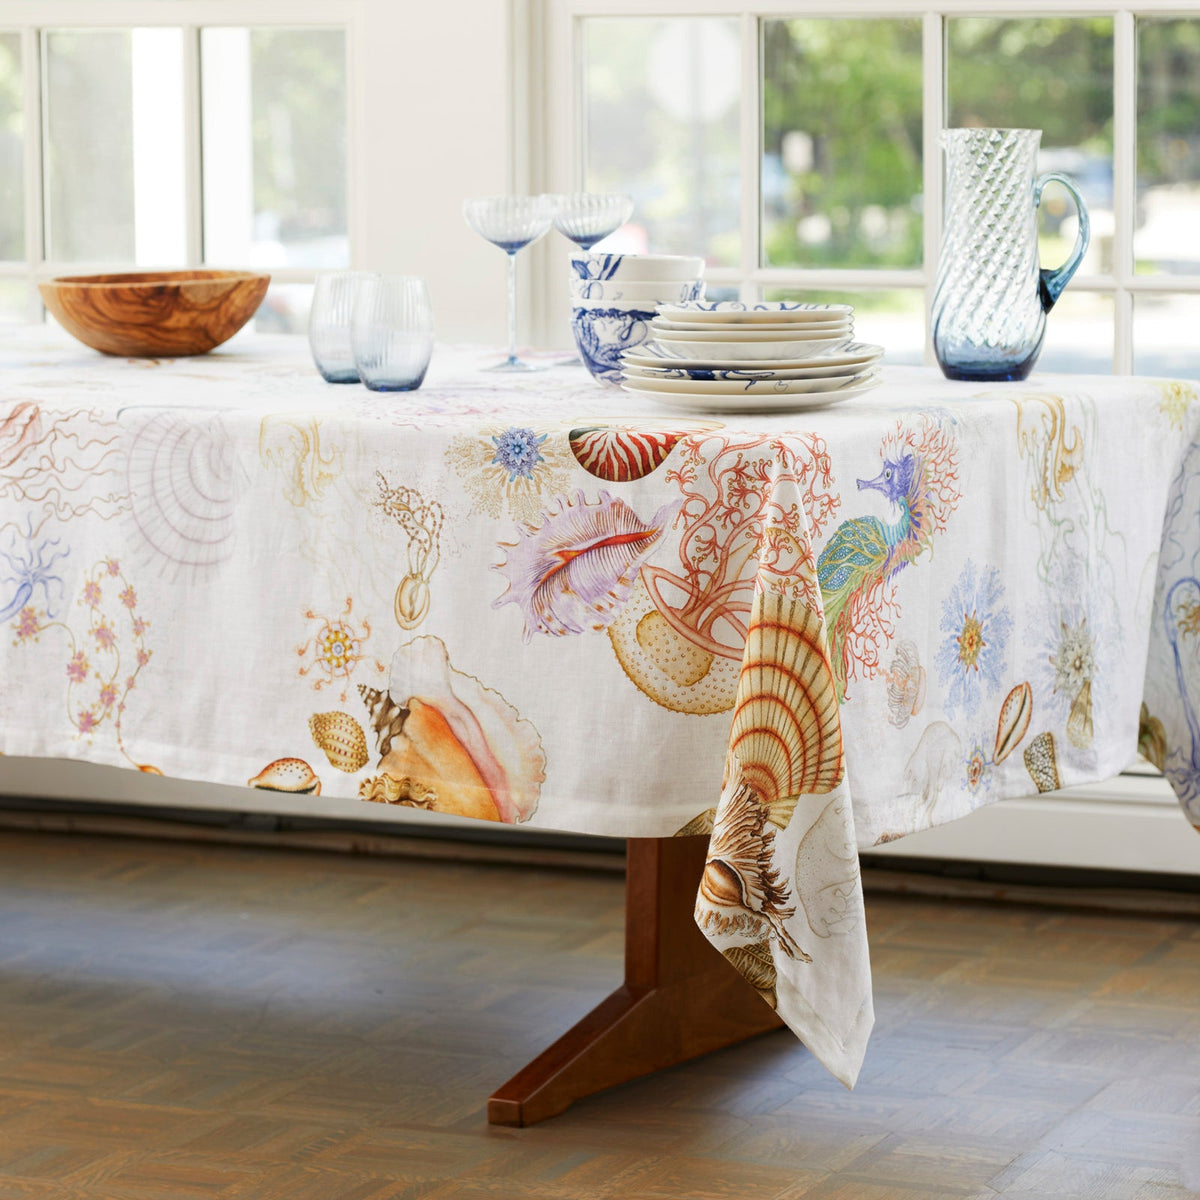 A vivid white Reef Hemp Tablecloth made from hemp, crafted by TTT, an Italian mill.